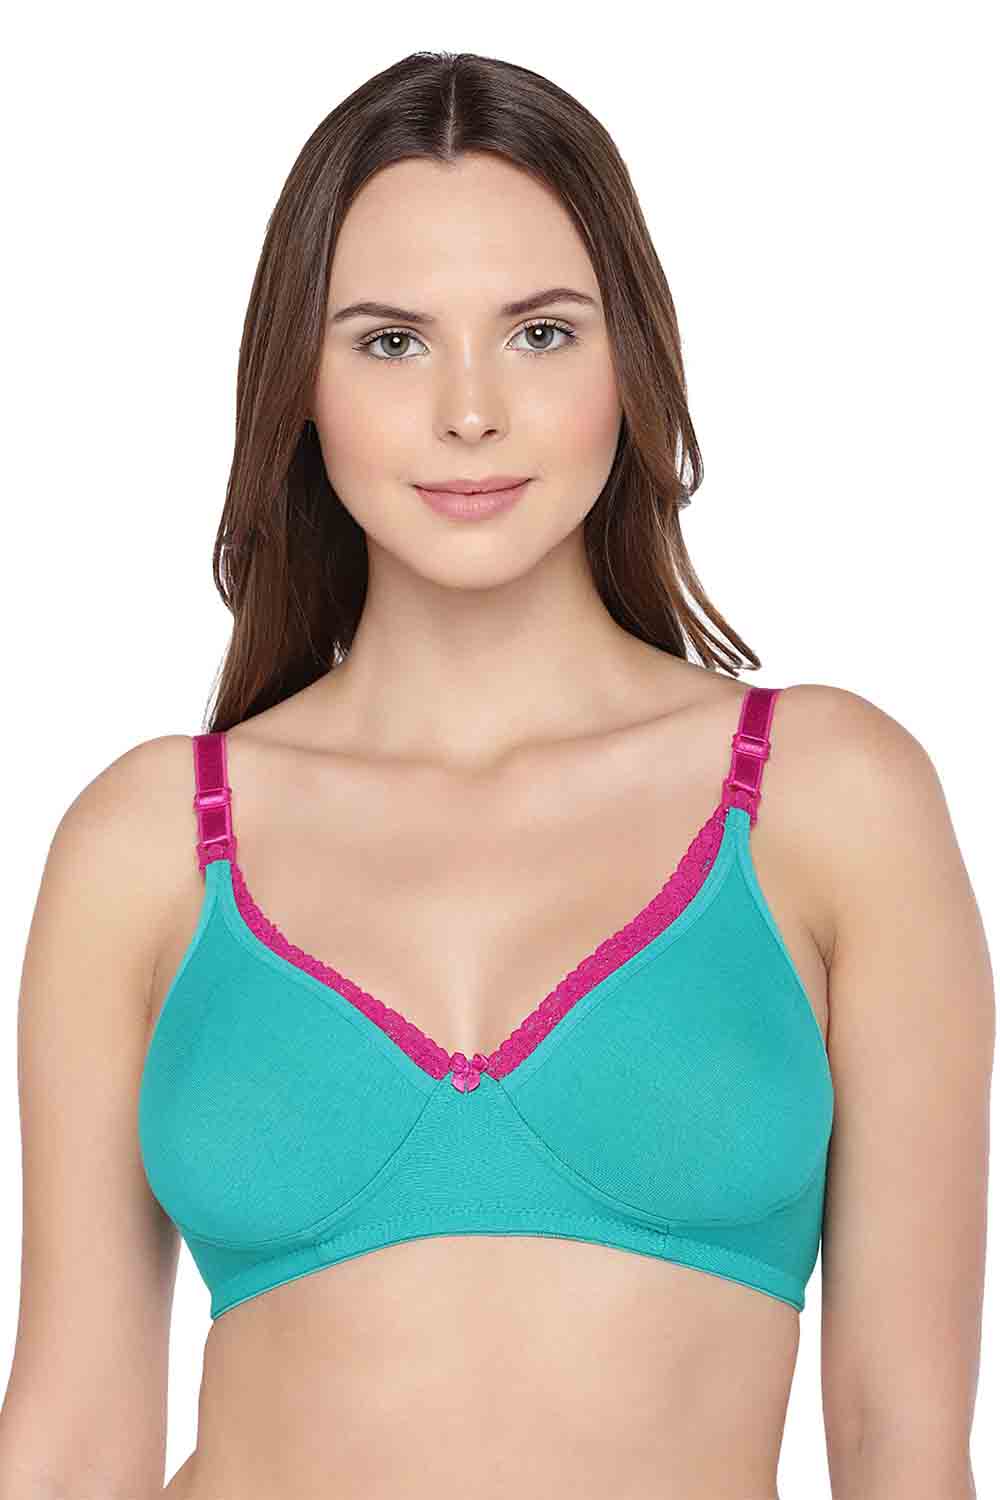 Women's Cotton Non Paddednon-wired Maternity Bra (pack Of 3) - 40b,  Available